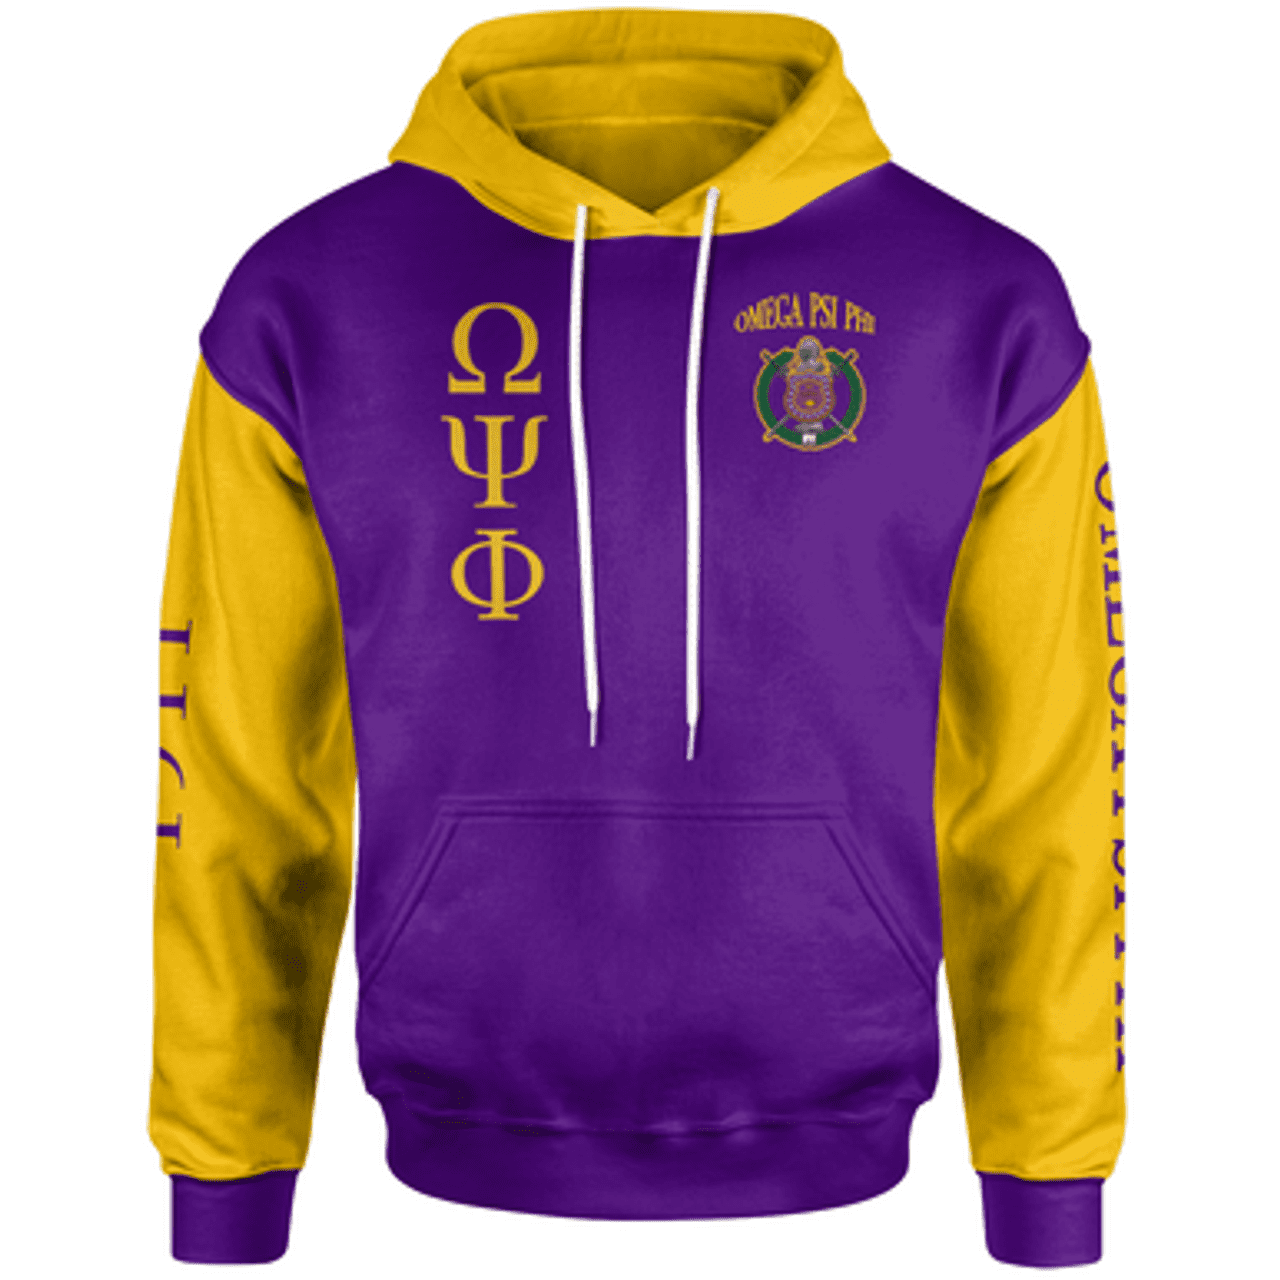 Omega Psi Phi Hoodie – Fraternity Limited Style Hoodie